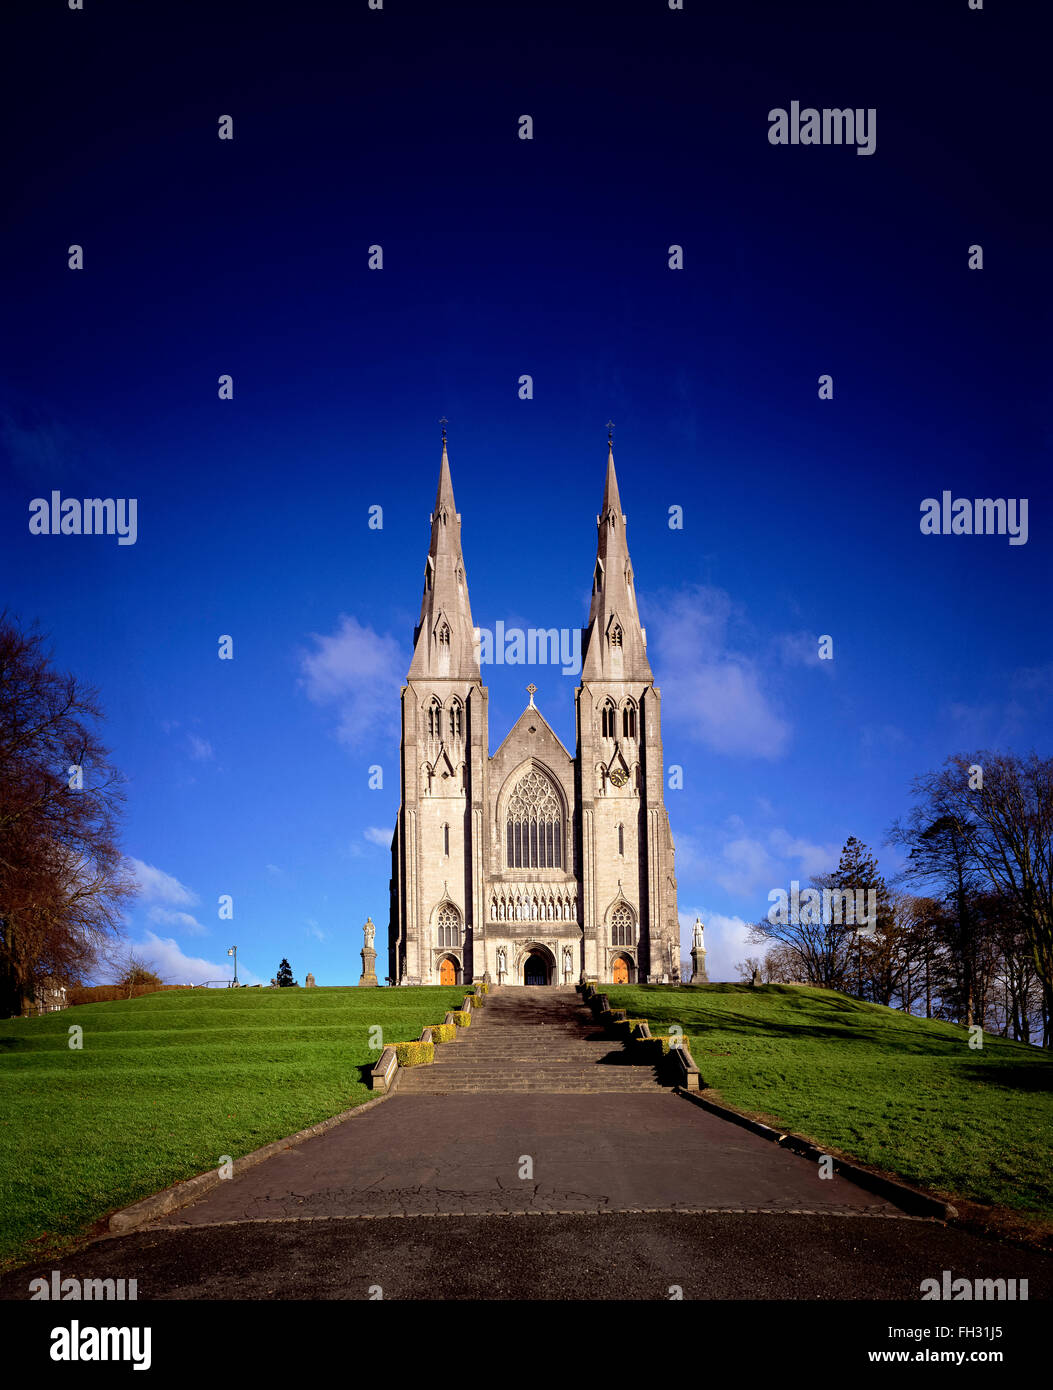 St Patricks RC cathedral Armagh Northern Ireland Stock Photo